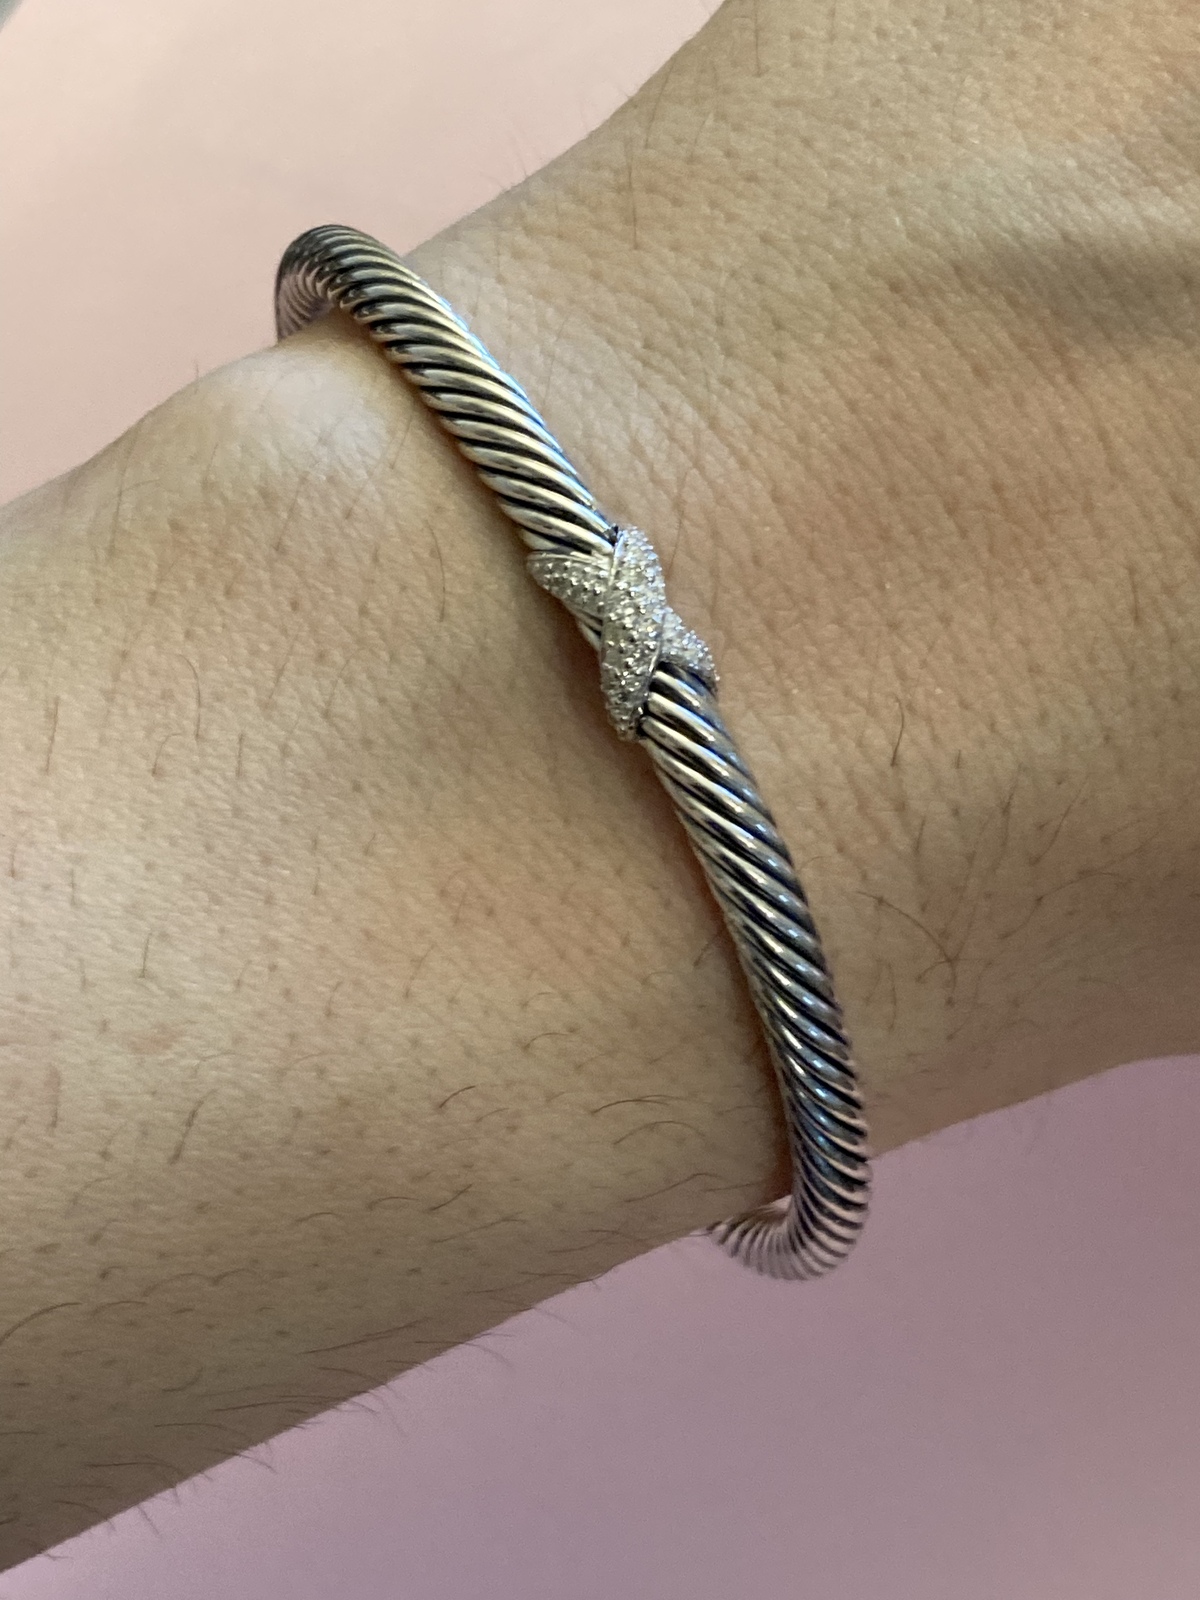 Primary image for PREVIOUSLY used David Yurman X DIAMOND bracelet  4mm Band size SMALL 